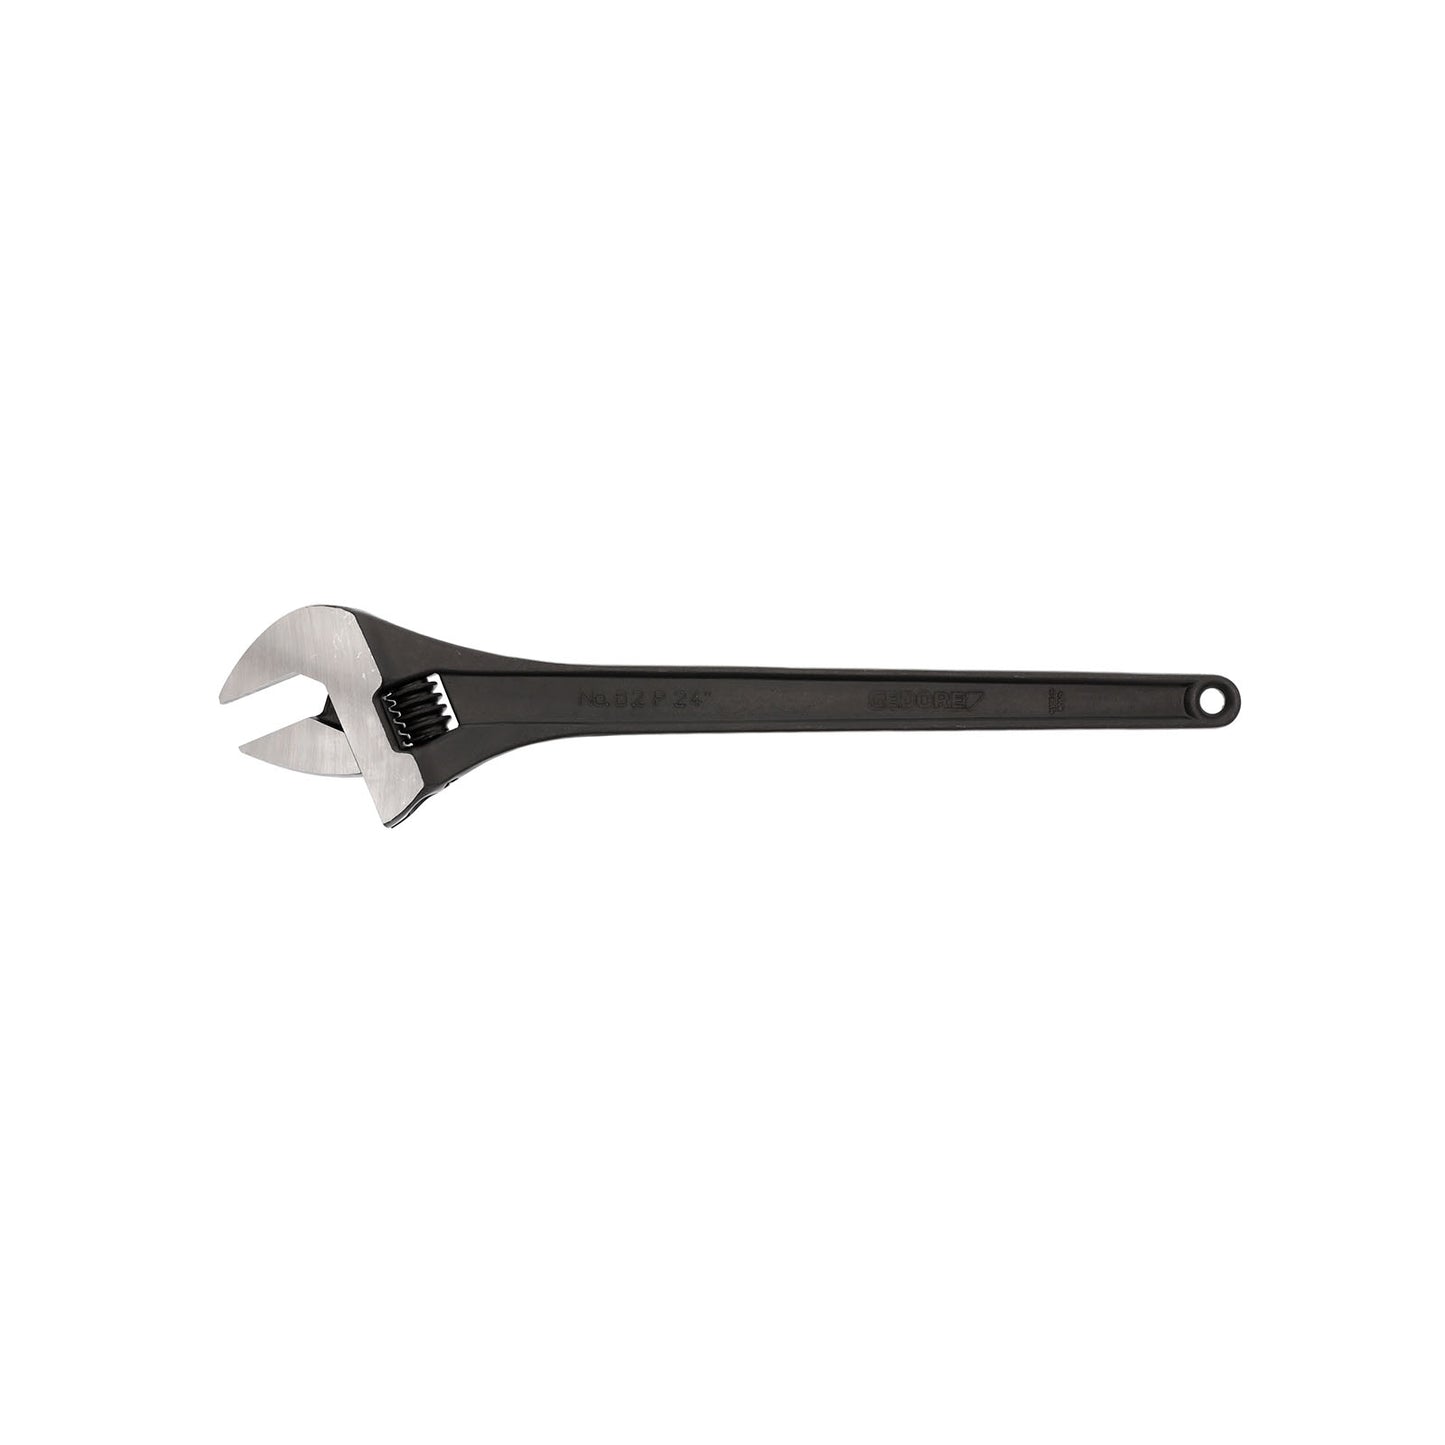 GEDORE 62 P 24 - Phosphated Adjustable Wrench, 24" (6360880)